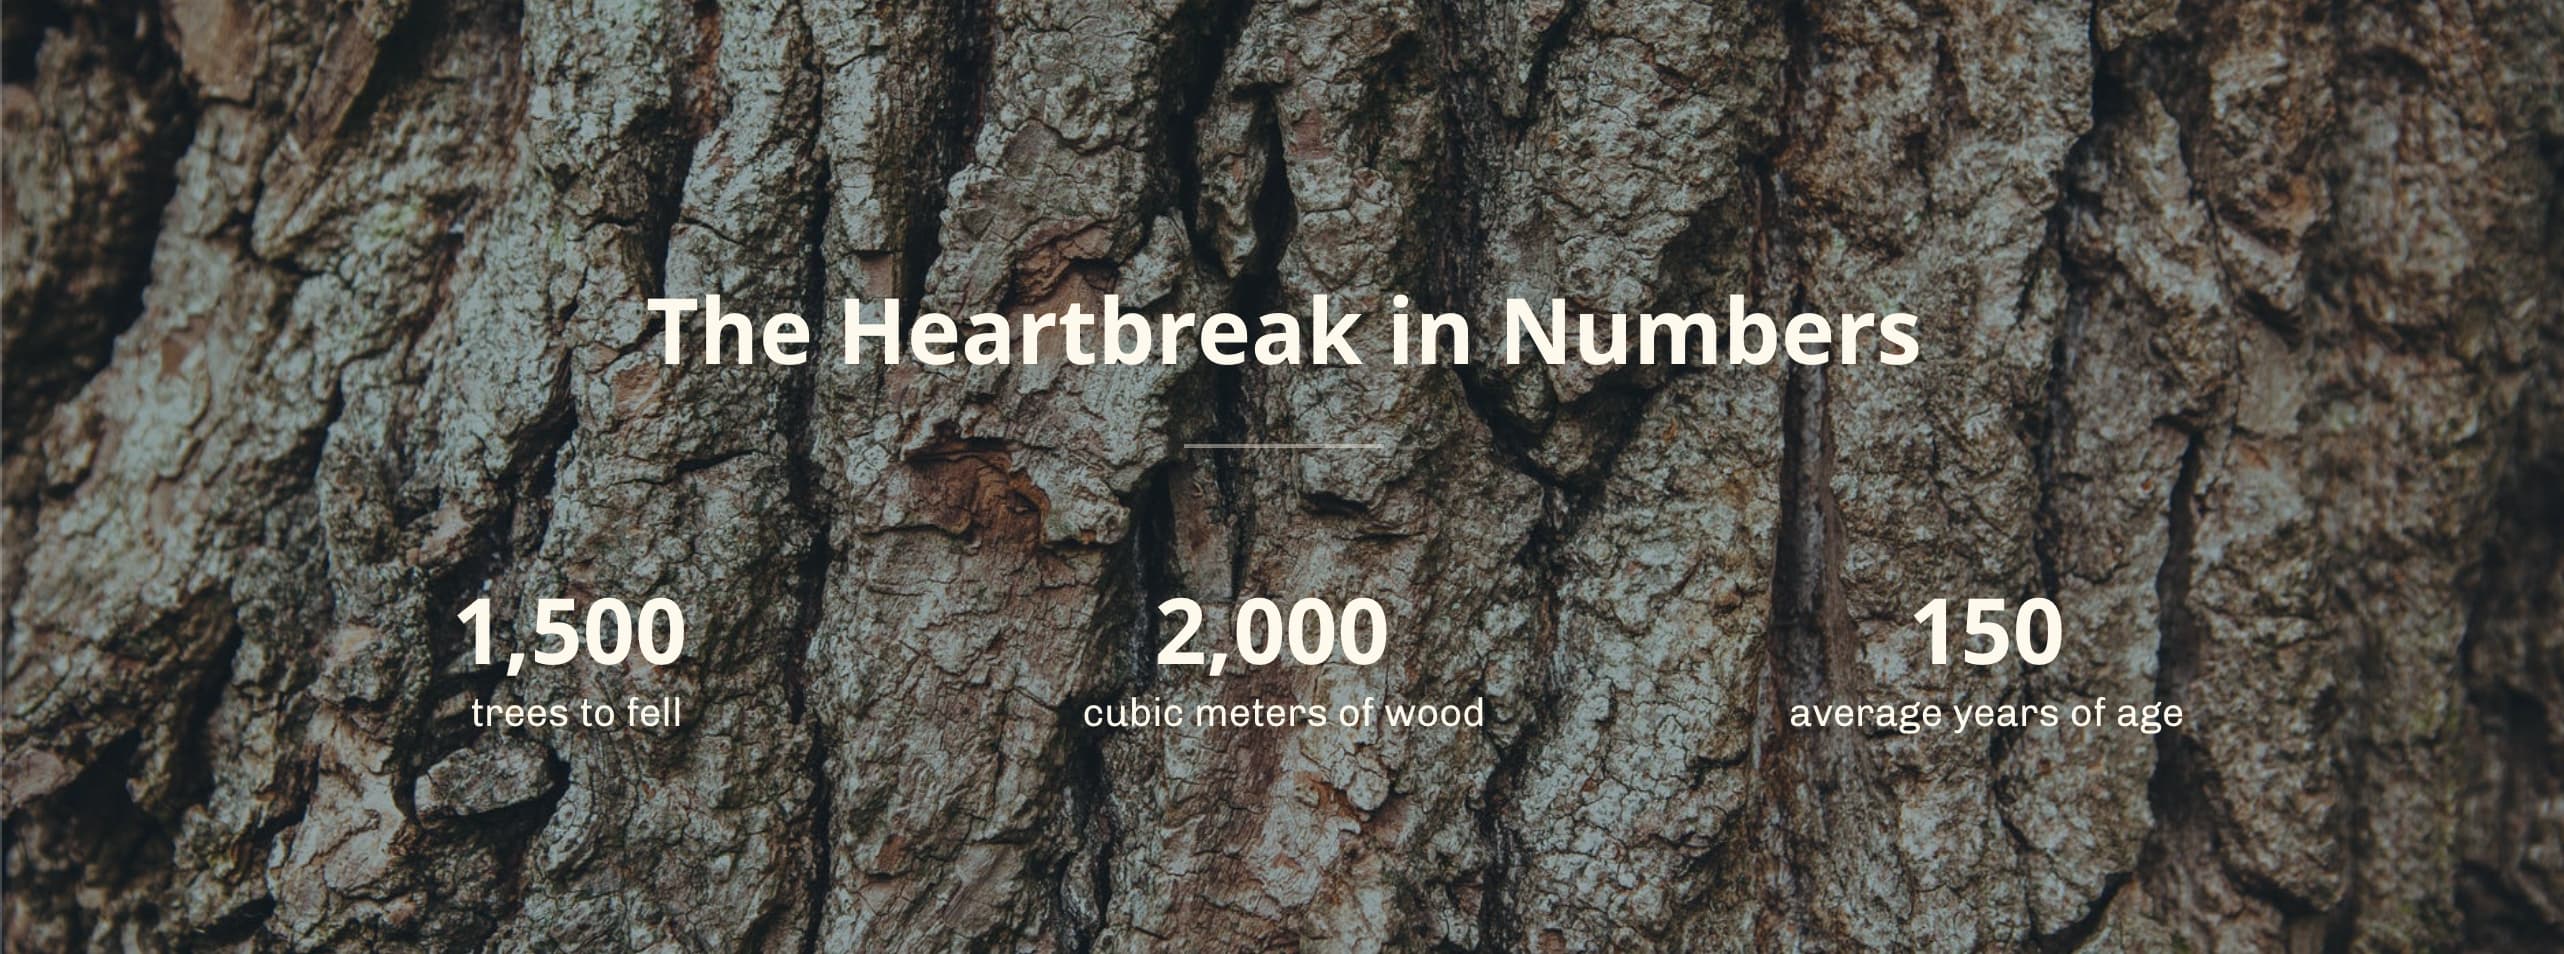 image of oak trunk wood, with white text overlaid saying 1,500 trees to fell, 2000 cords of wood, 150 average age